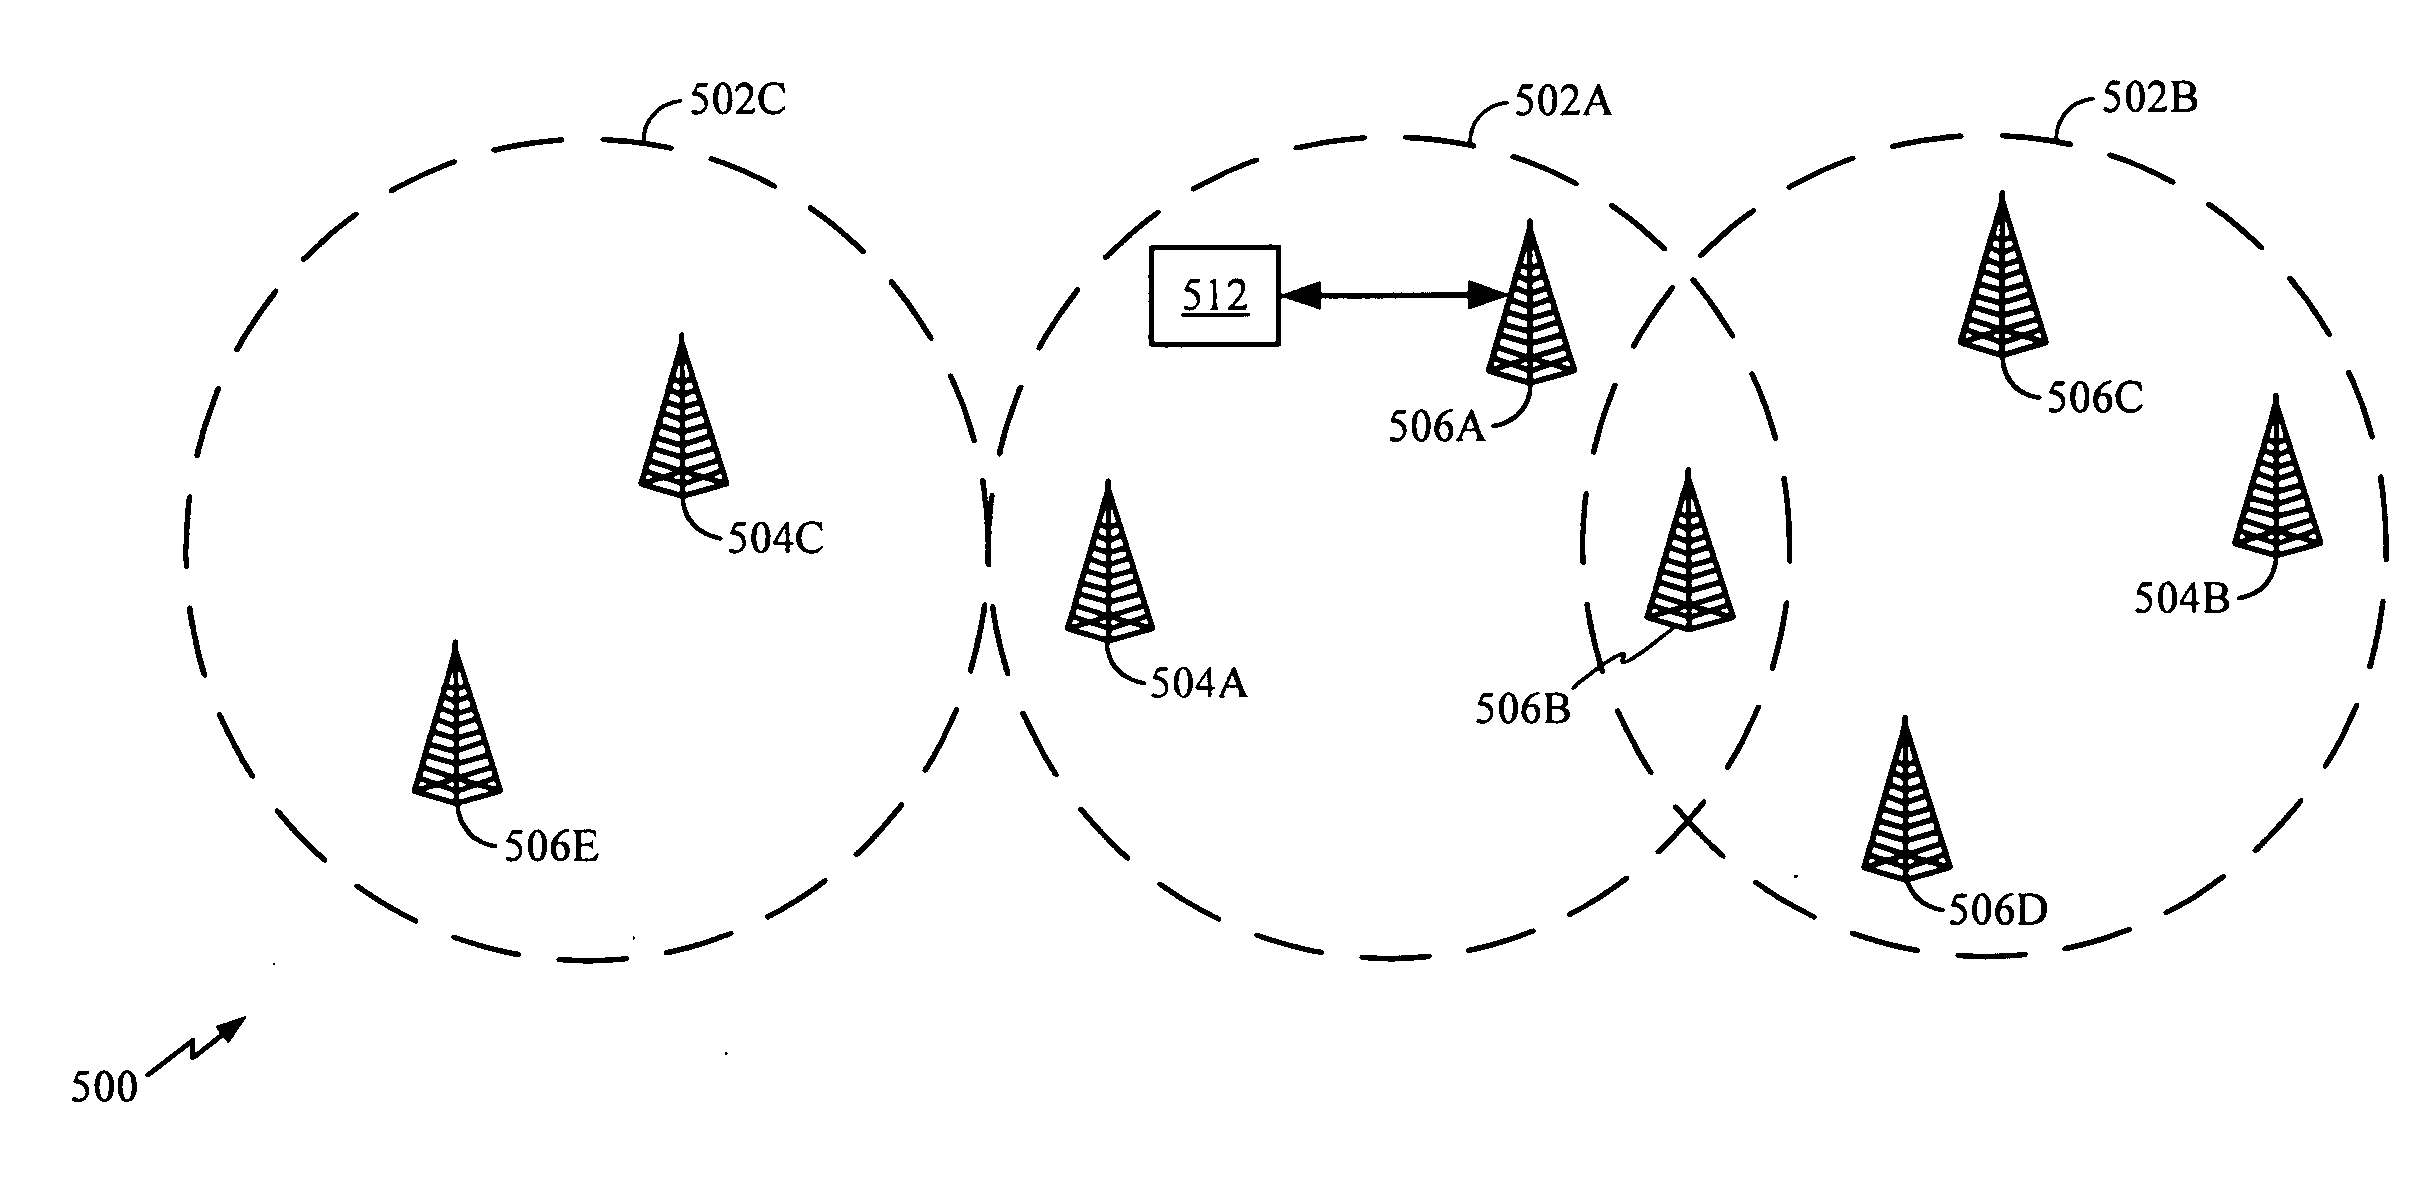 System and method for global power control